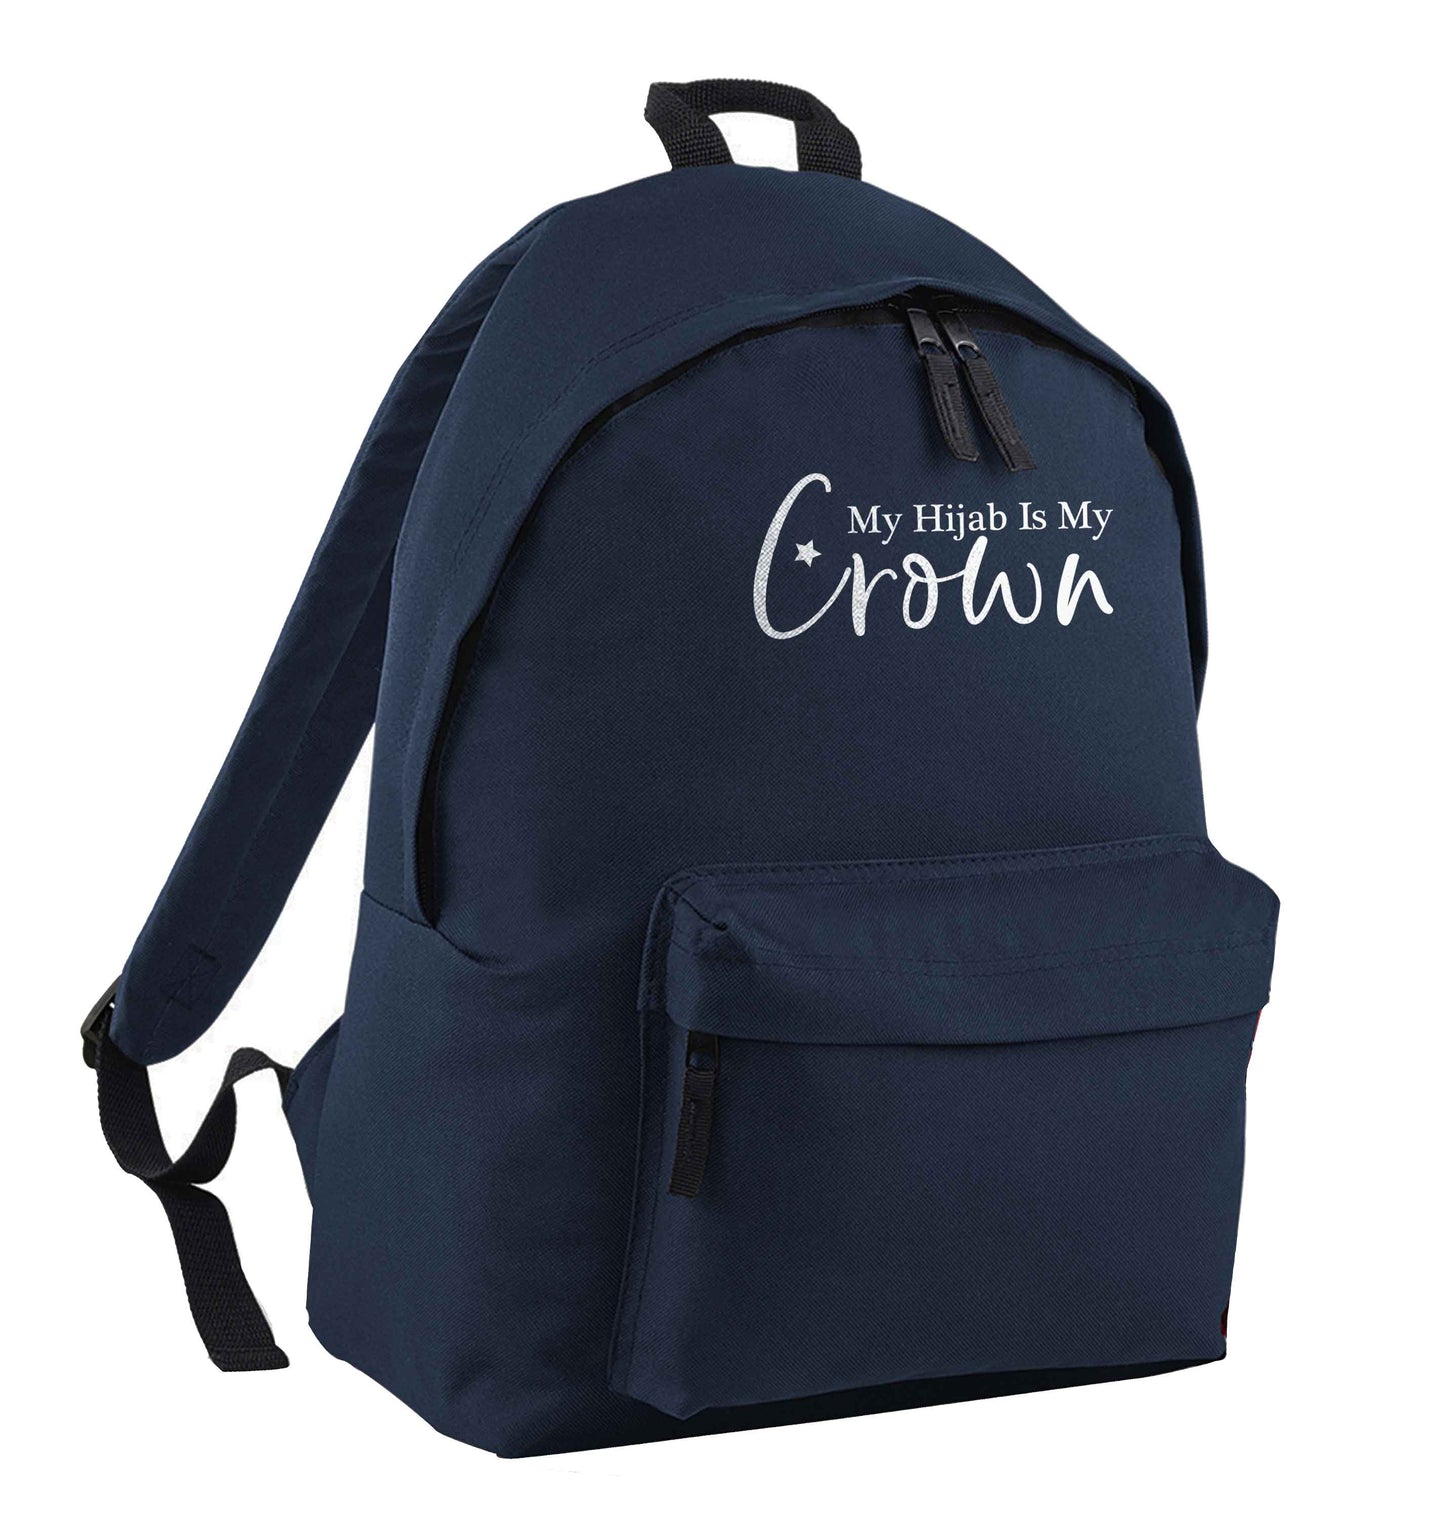 My hijab is my crown navy adults backpack